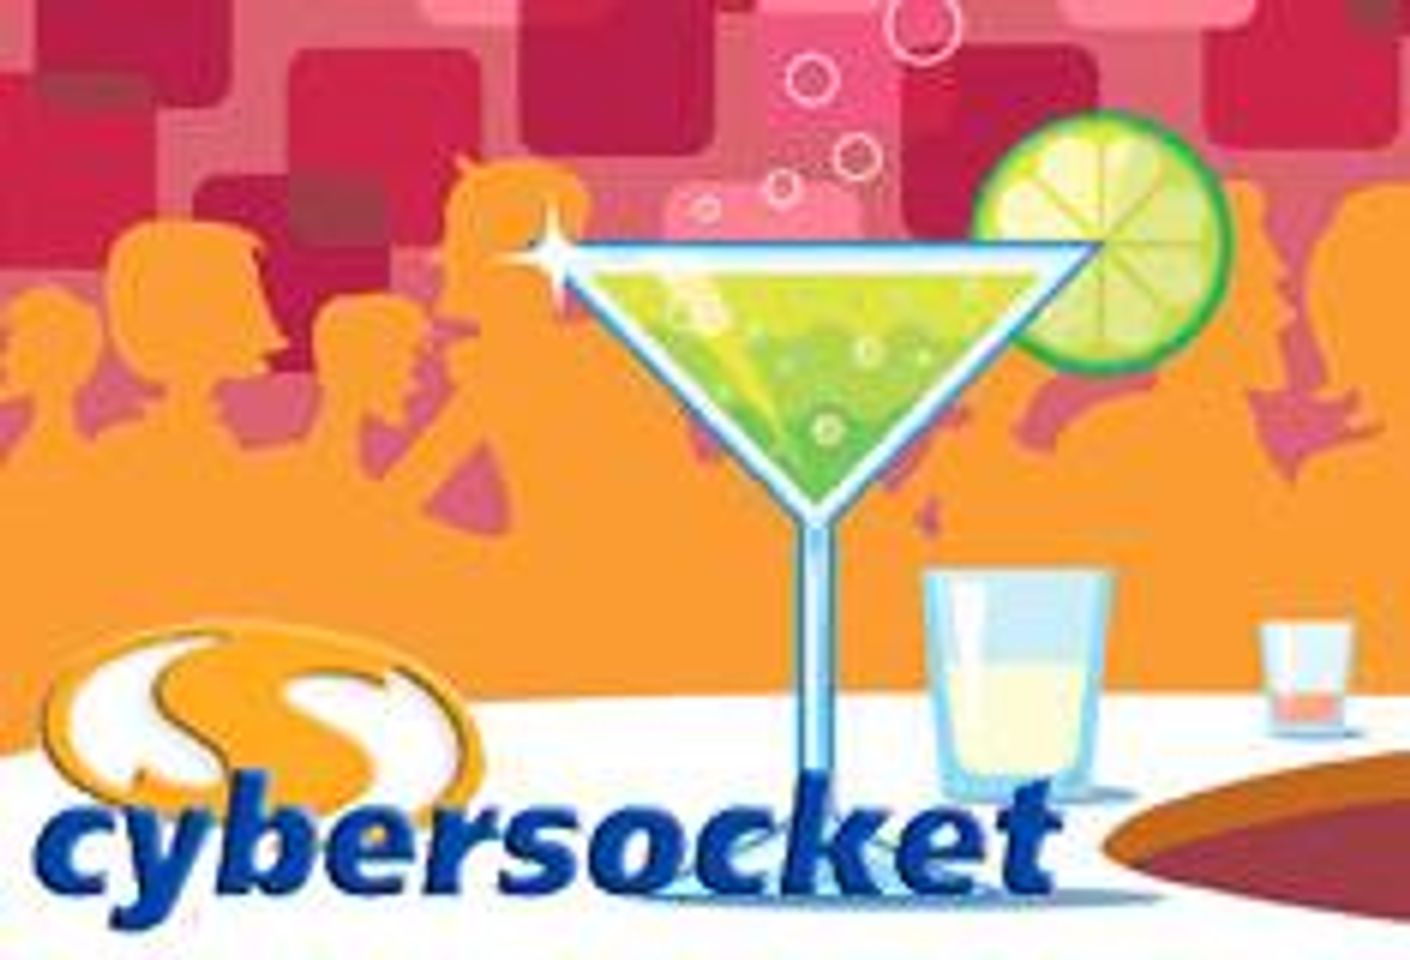 Cybersocket Opens Nominations for Web Awards